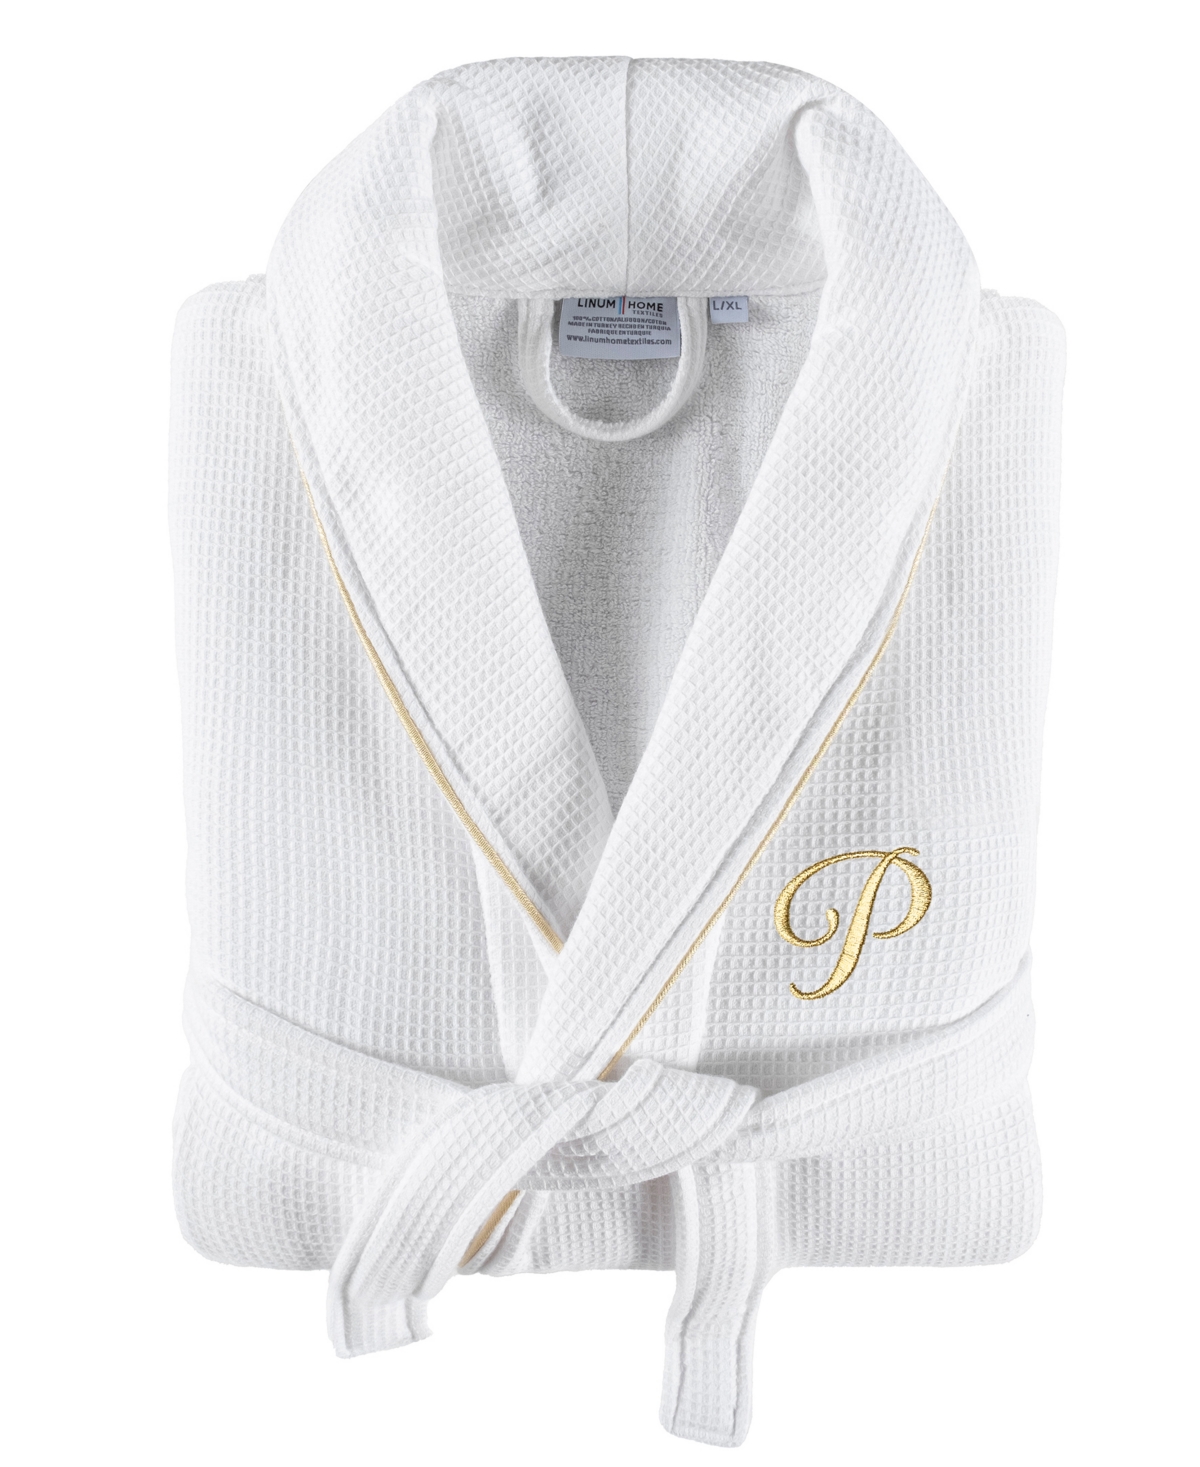 Linum Home Textiles 100% Turkish Cotton Unisex Personalized Waffle Weave Terry Bathrobe With Satin Piped Trim In White P